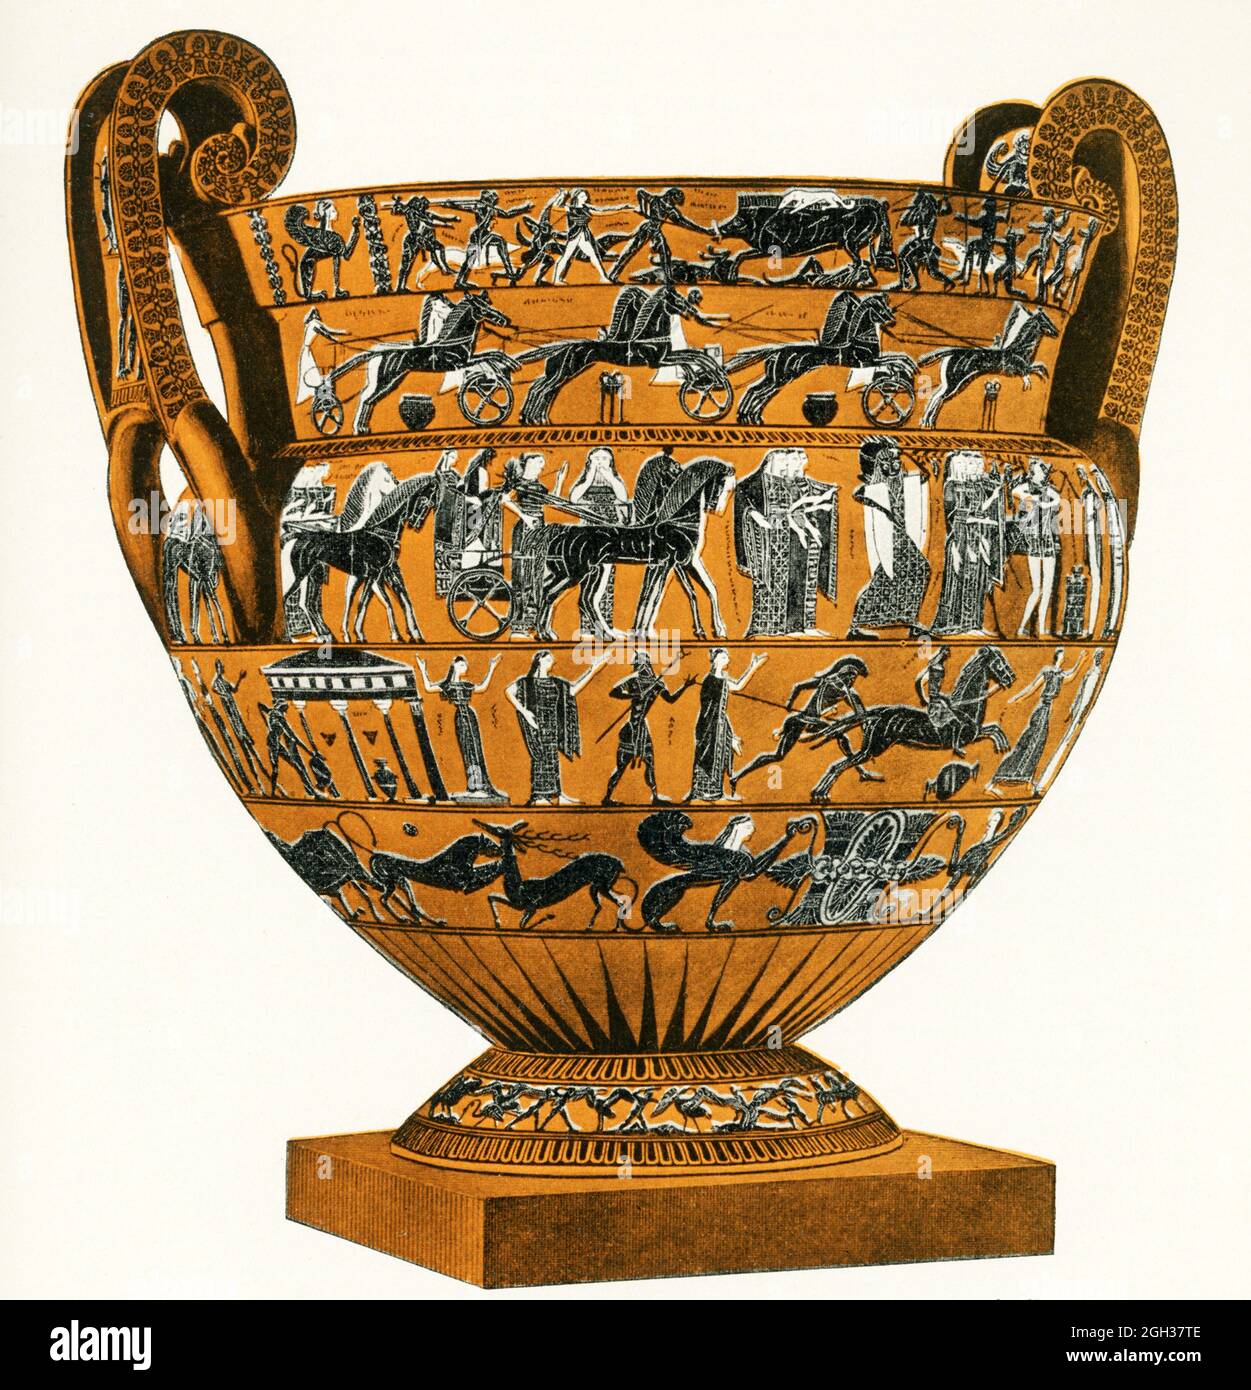 A major monument in the history of Greek pottery, the François Vase is a large (66 cm) volute krater in a black-figure design, signed both by the potter, Ergotimos, and the painter, Kleitias (also spelled Clitias). The Attic work has been dated to 570 BC. In 1900, a disgruntled museum guard threw a stool at the case and smashed the François Vase to 638 pieces! It was restored in by Pietro Zei, incorporating the Strozzi fragment, but missing another piece which had been stolen. That piece was returned in 1904. A new reconstruction was performed in 1973. Today the krater is located in the Floren Stock Photo